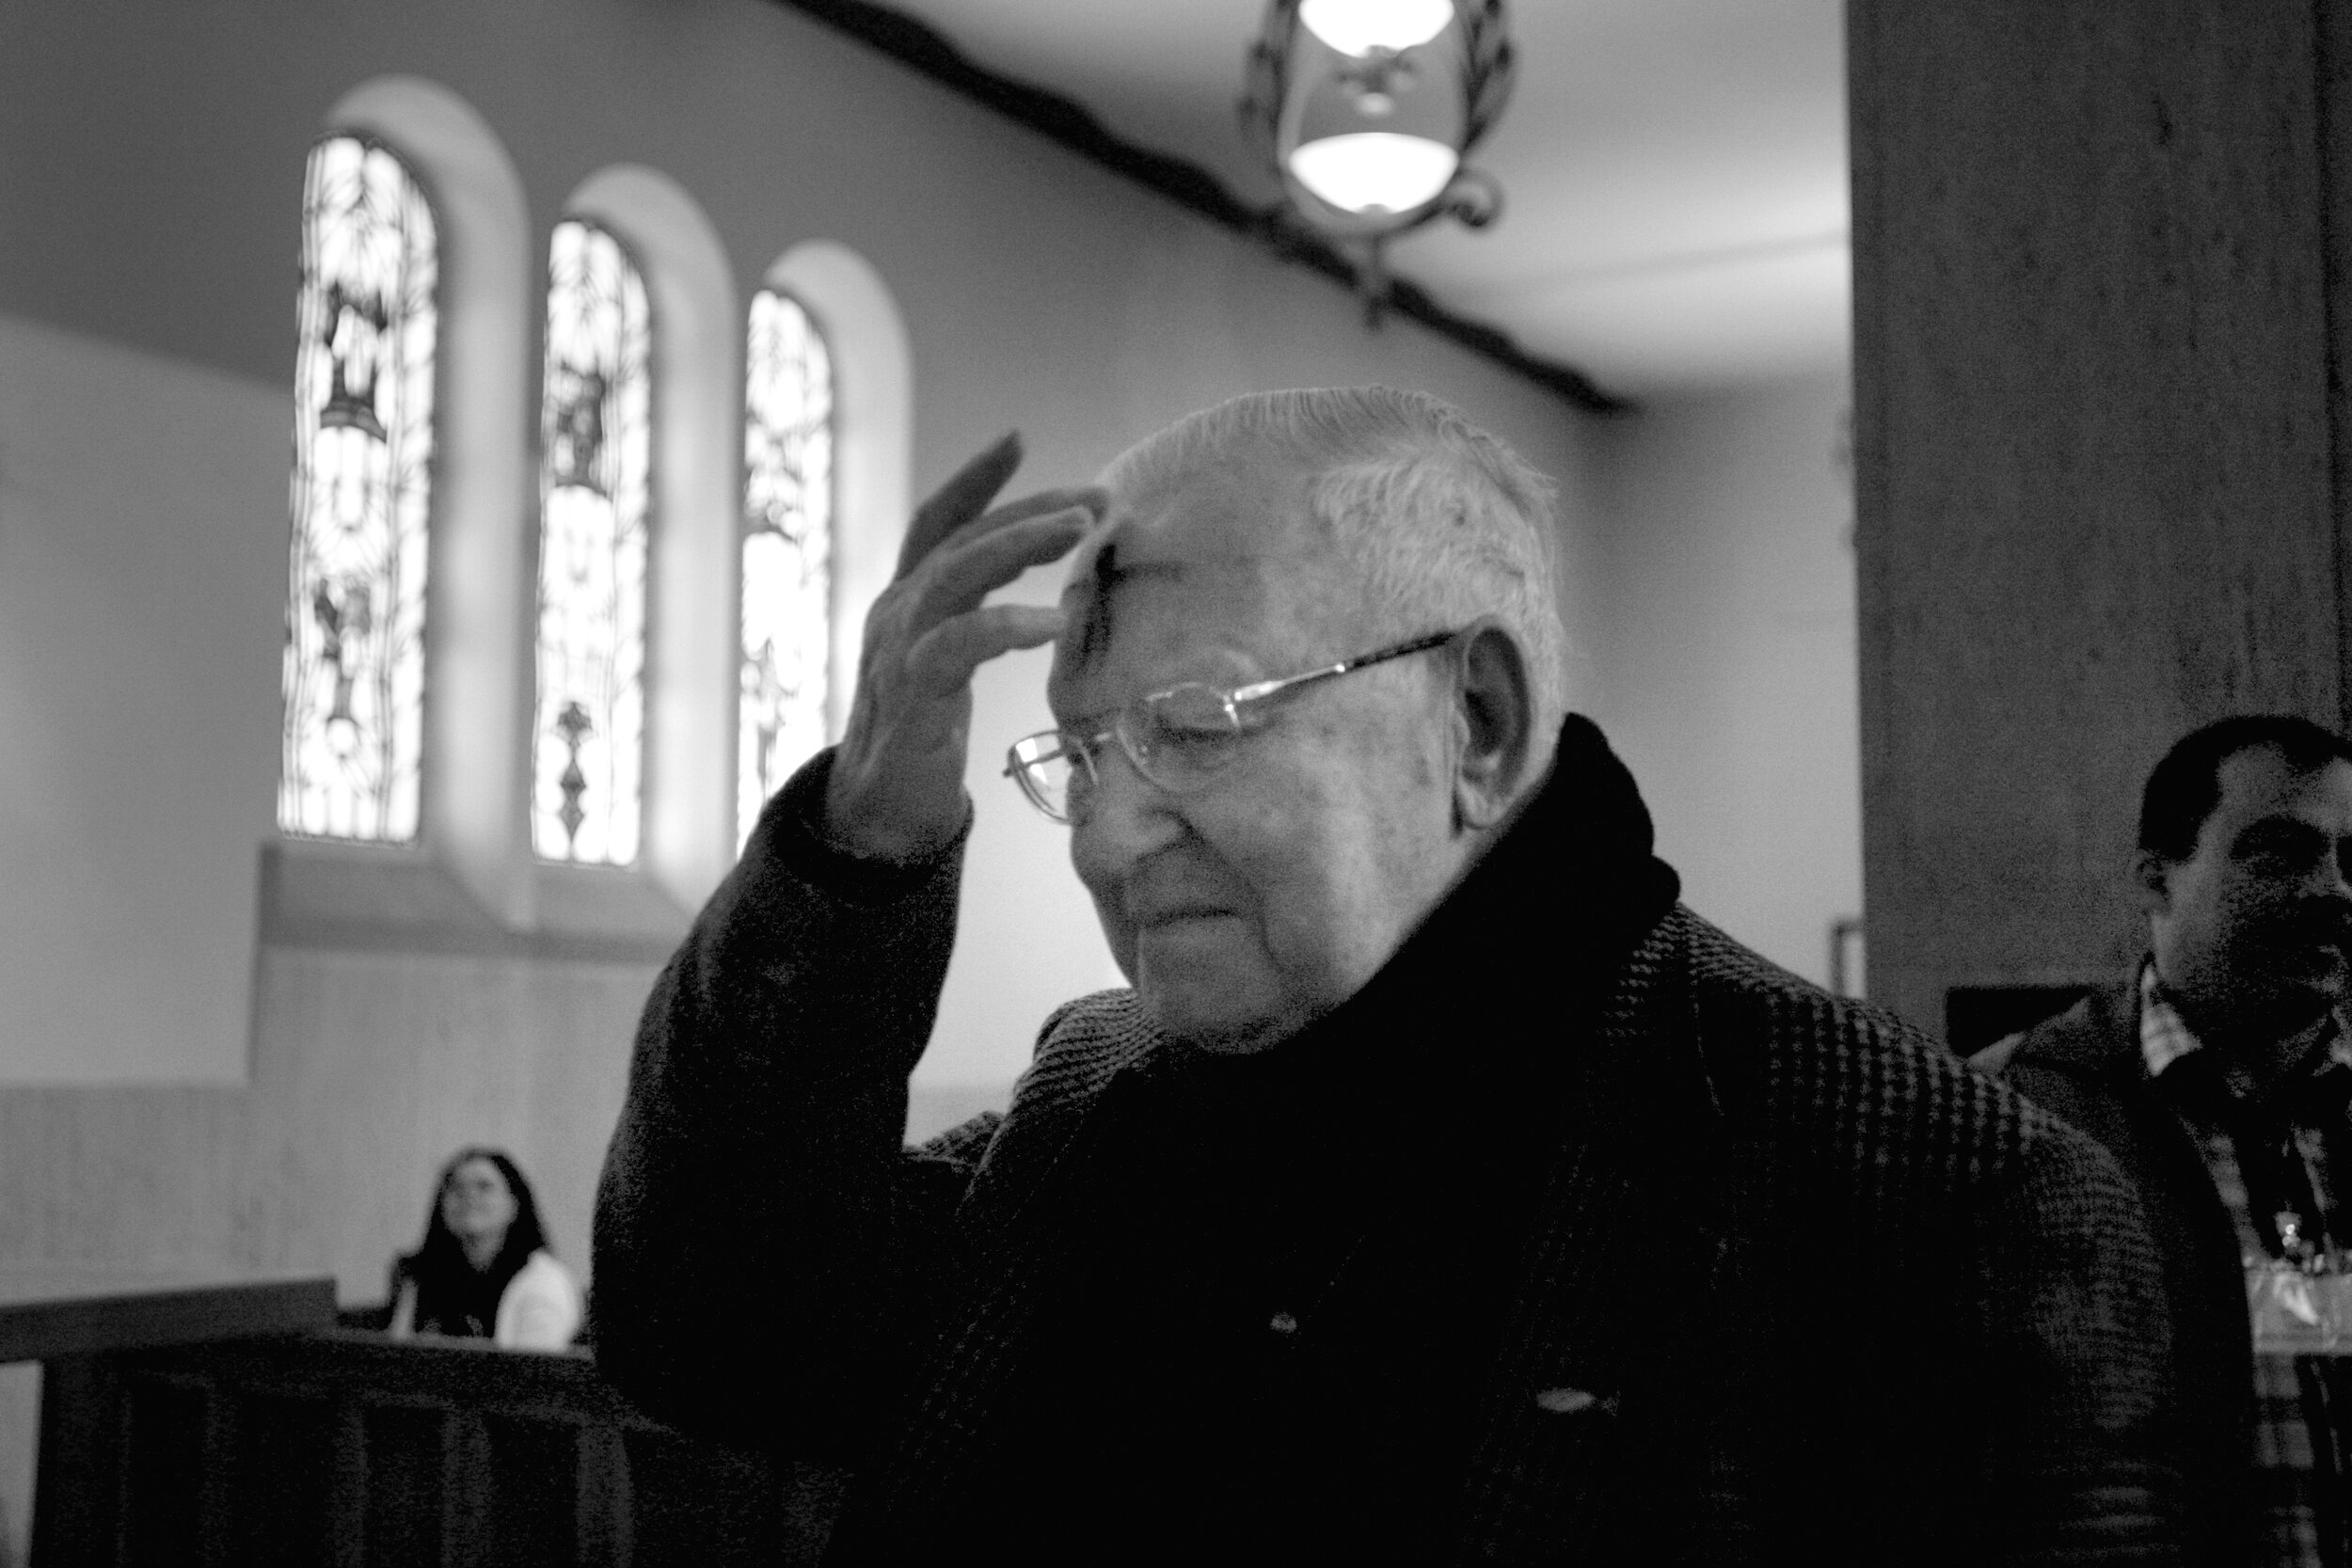  Harry Bartron, 87, a gay Catholic, makes the sign of the cross after receiving his ashes on Ash Wednesday at Blessed Sacrament Catholic Church in Hollywood, Calif. The priest marks a cross on parishioners' foreheads as a symbol of repentance. Ash We